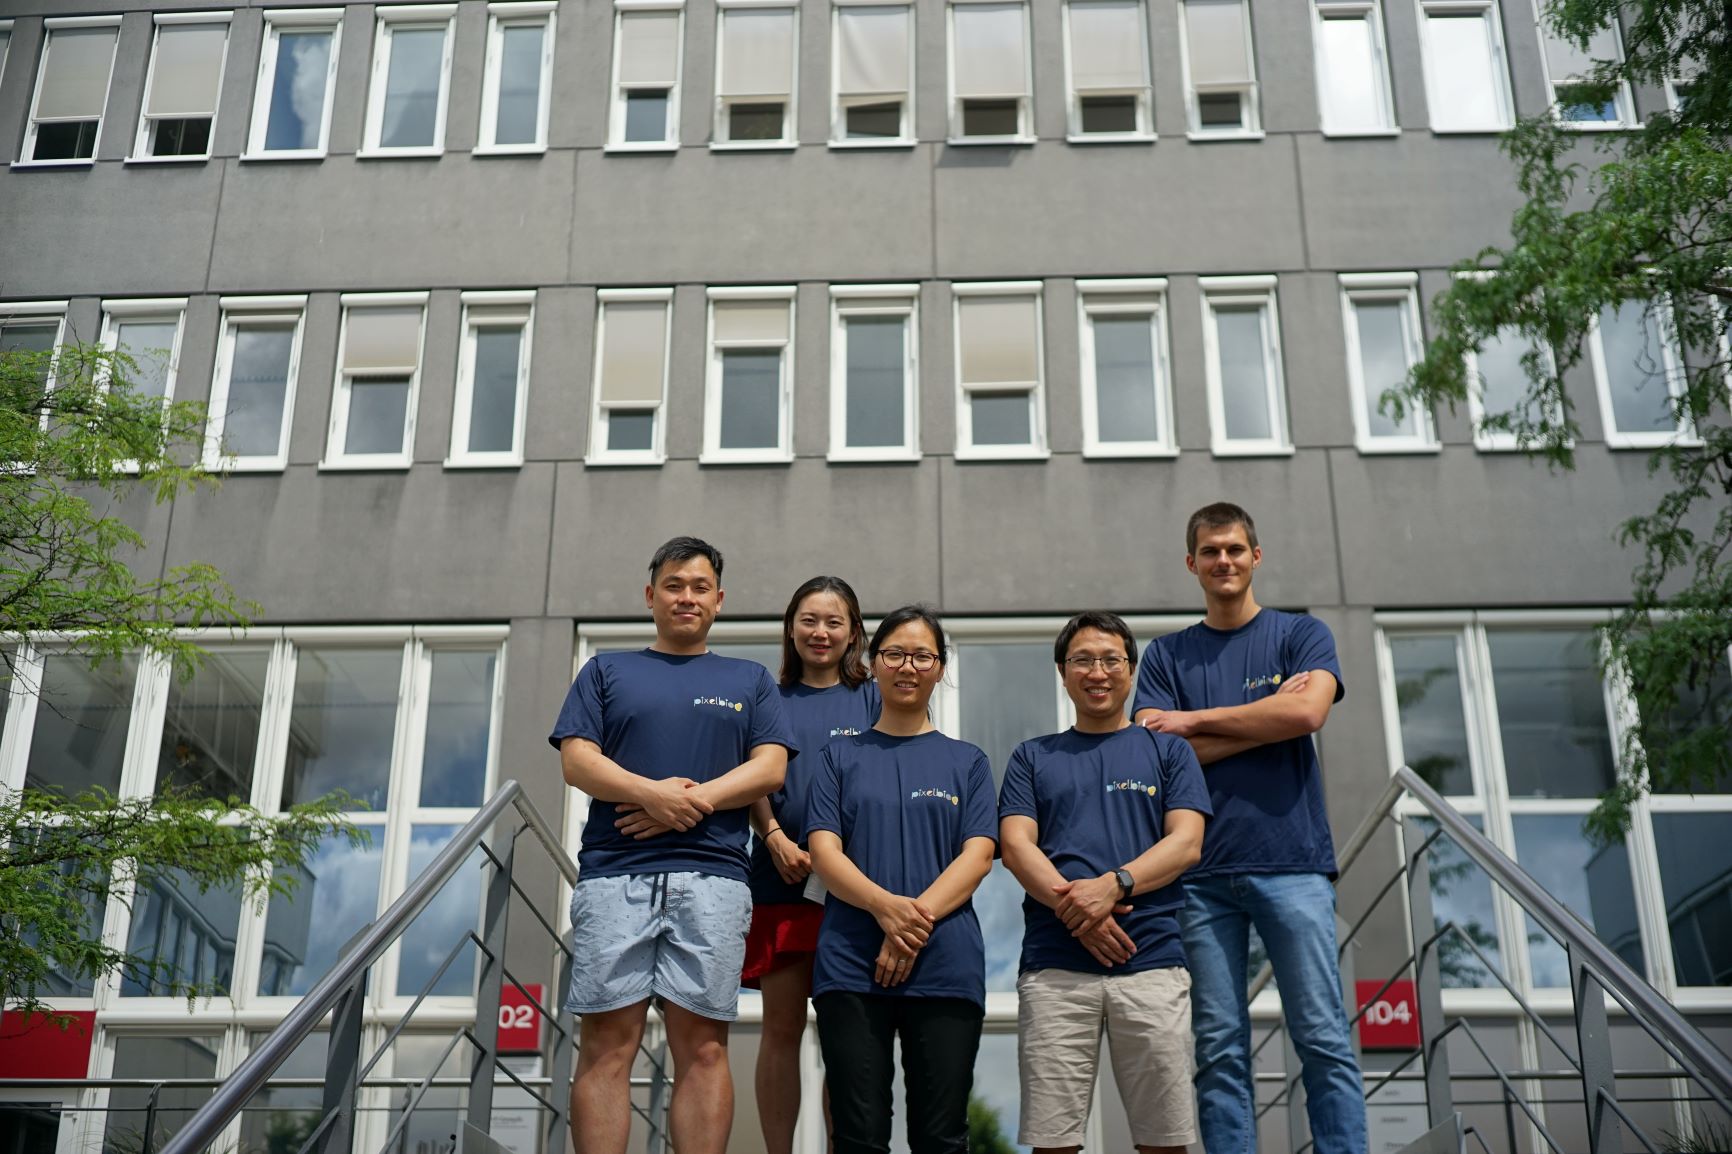 The 5-member team of PixelBiotech GmbH (Yongsheng Cheng is the second left person) is standing in front of its laboratory building in Heidelberg Wieblingen.